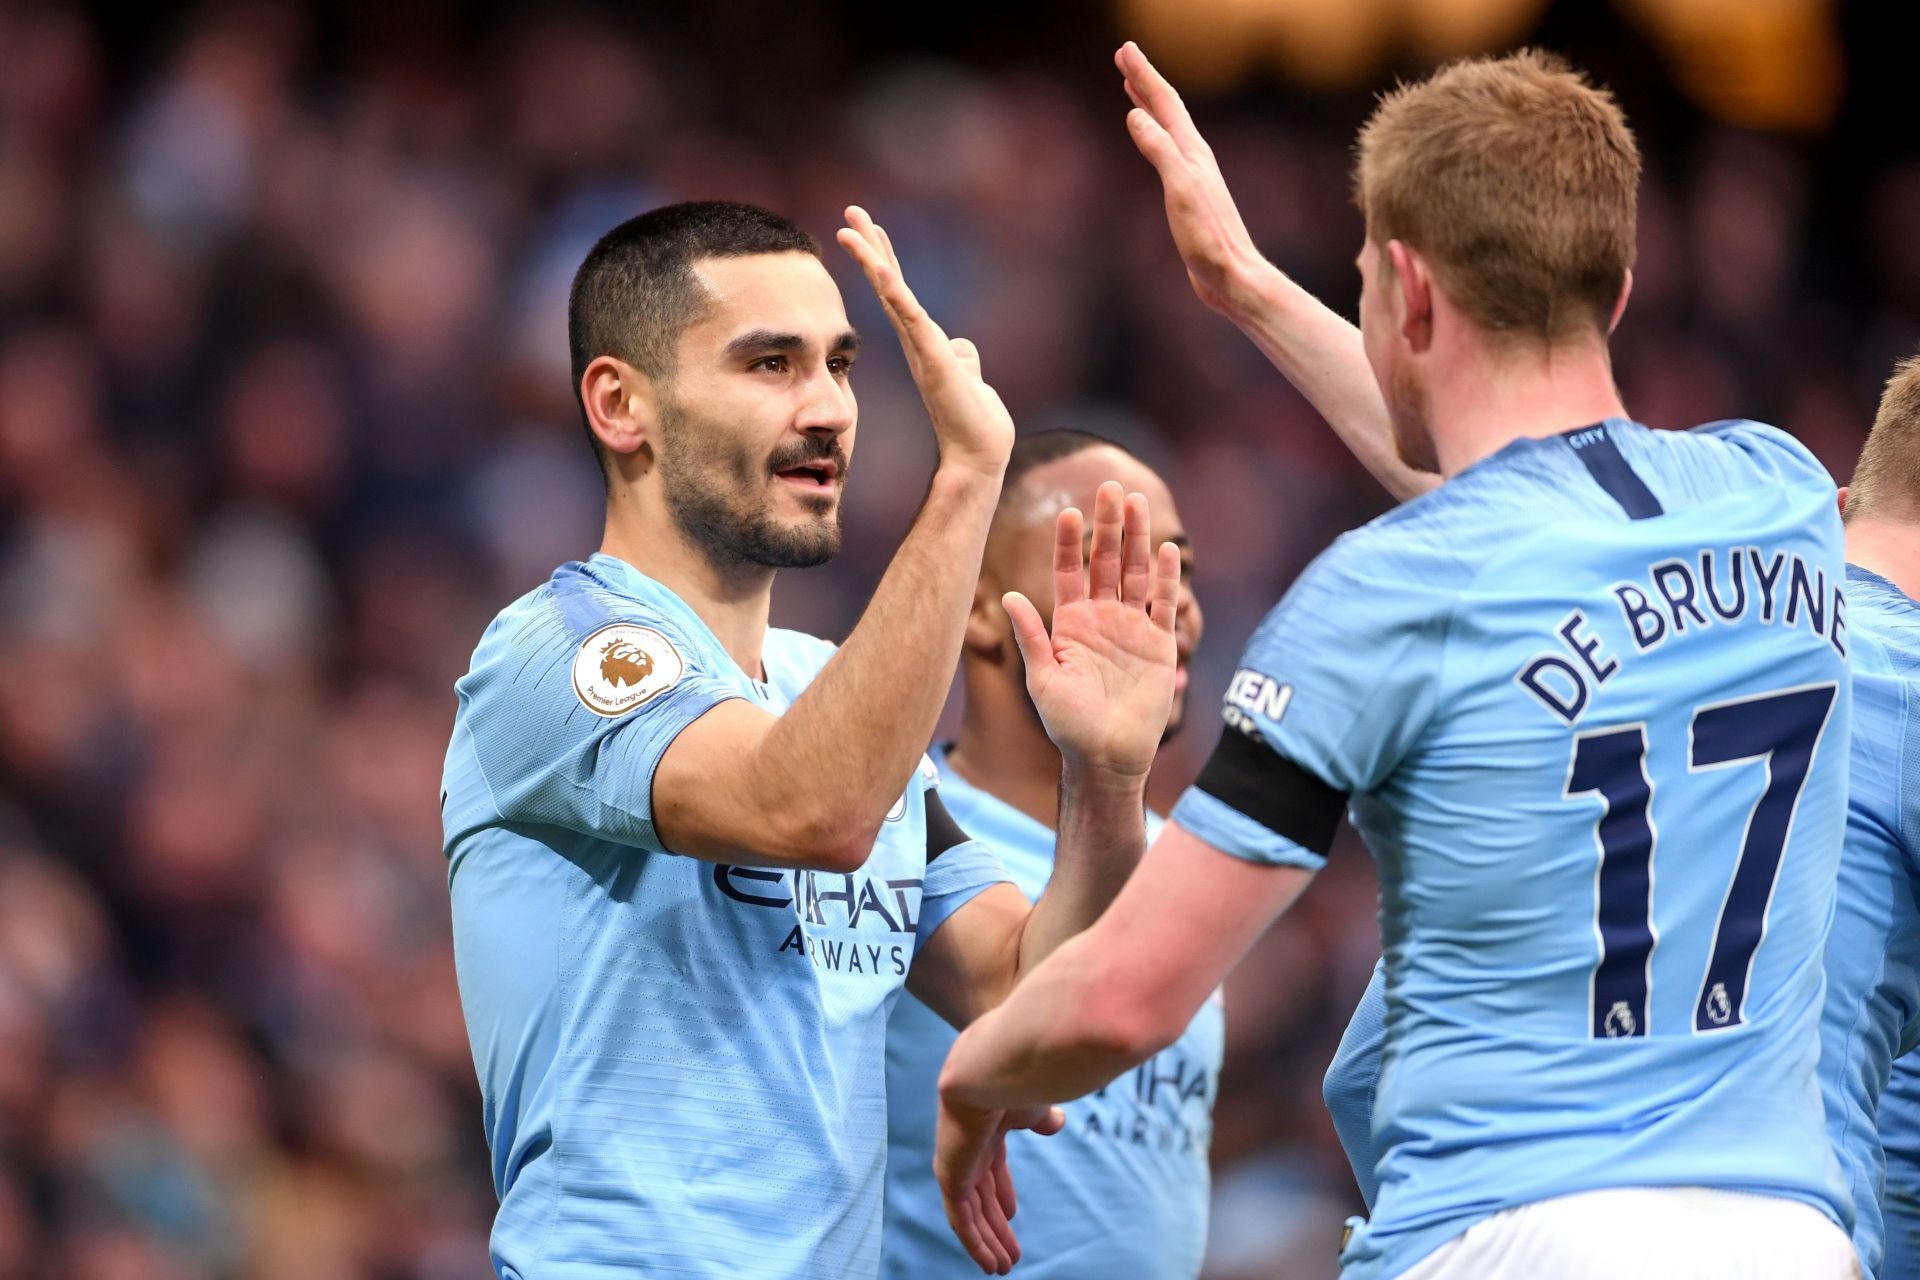 Ilkay Gundogan and Kevin De Bruyne caused havoc together at Manchester City.